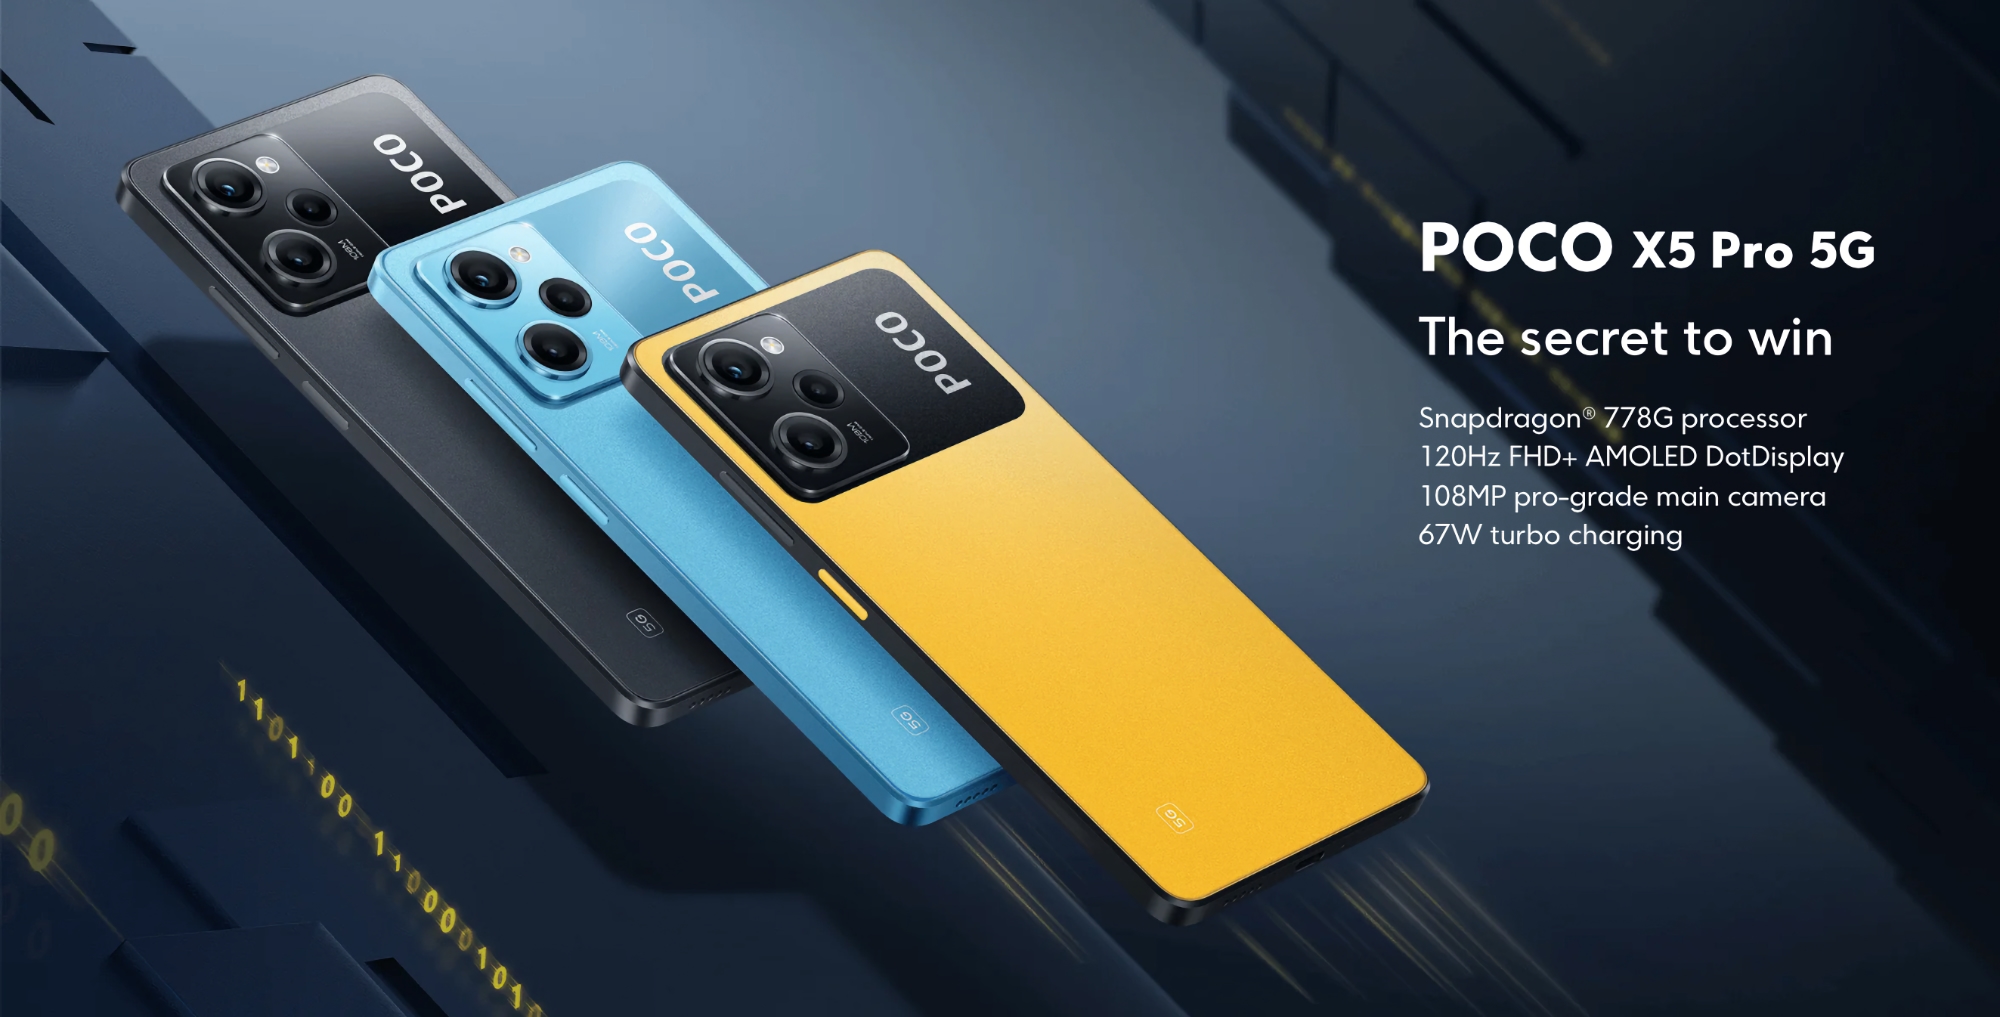 POCO X5 Pro: 120Hz AMOLED display, Snapdragon 778G chip, 108 MP camera and 5000 mAh battery with 67W charging capability